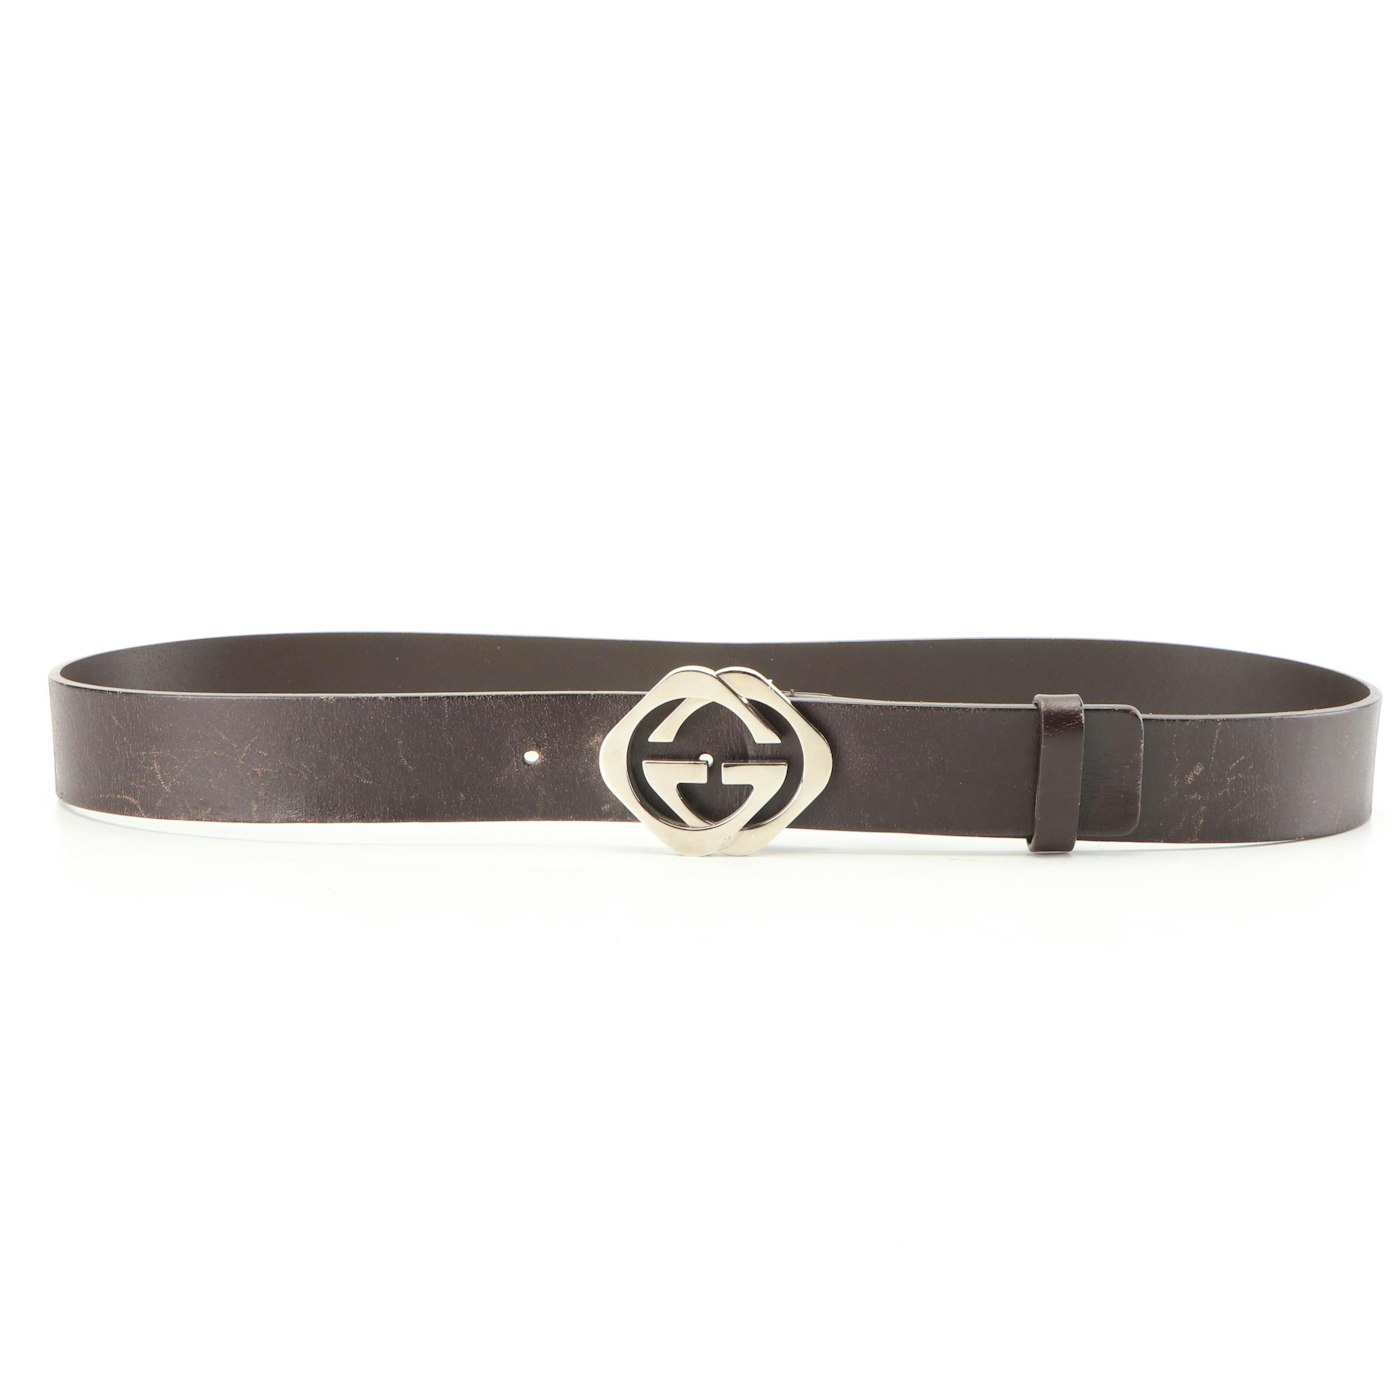 Gucci GG Brown Leather Belt with Silver Tone Buckle, Made in Italy | EBTH